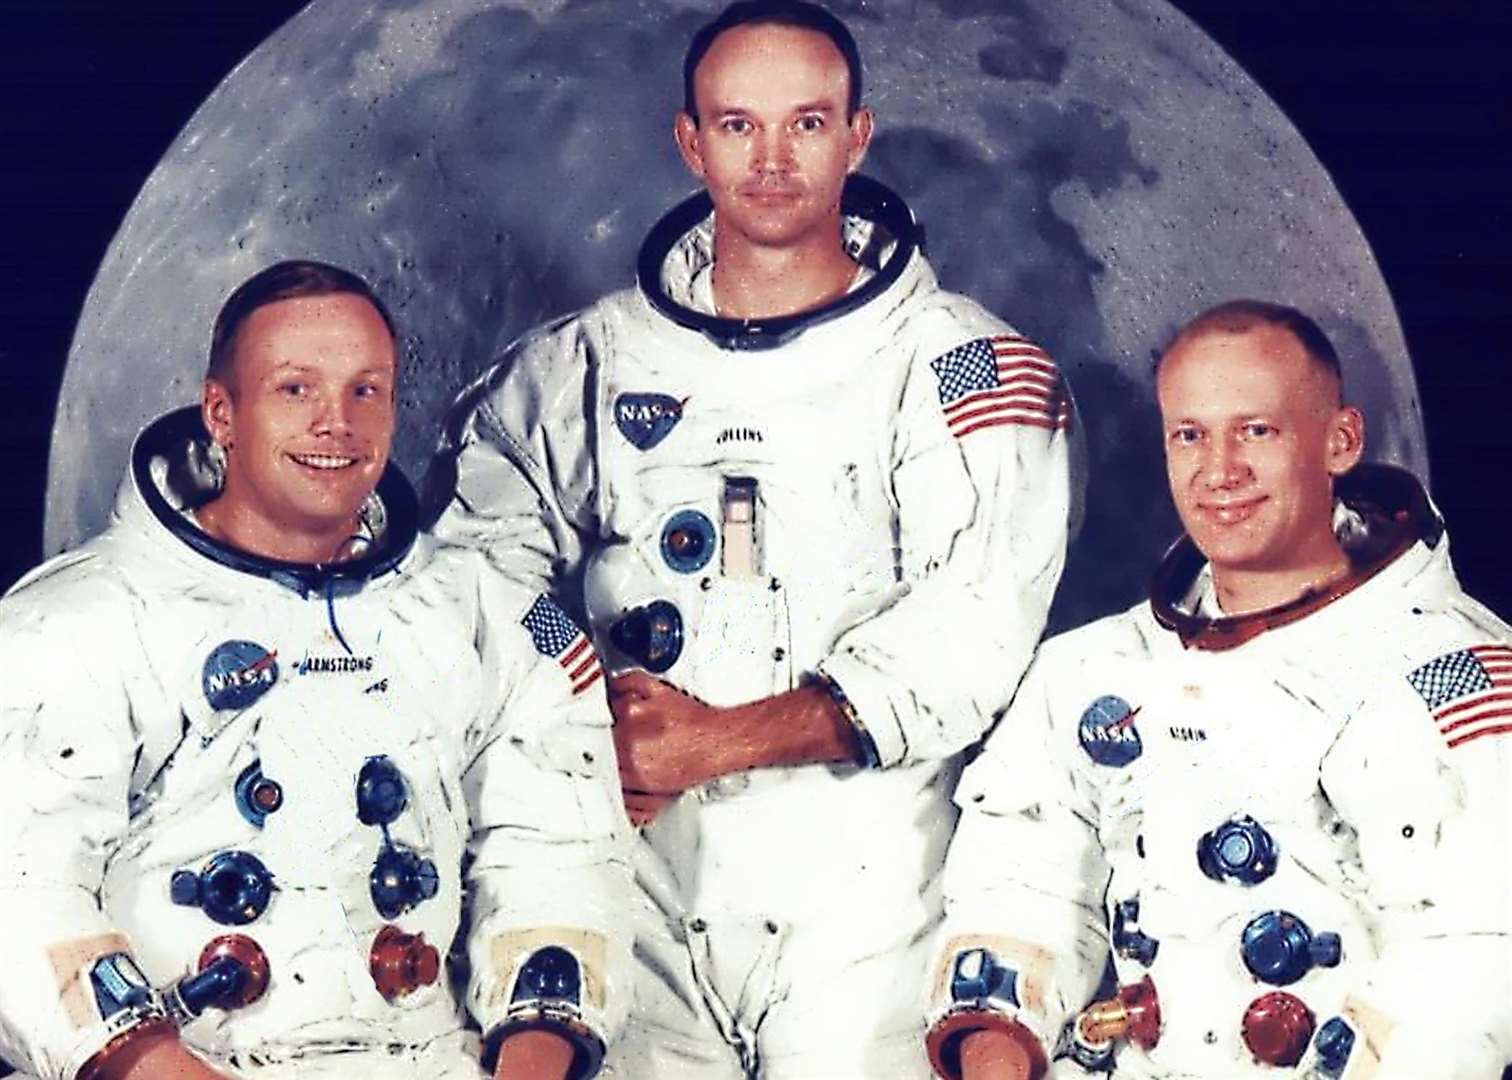 Neil Armstrong, Michael Collins and Buzz Aldrin were the first men on the moon on July 20, 1969